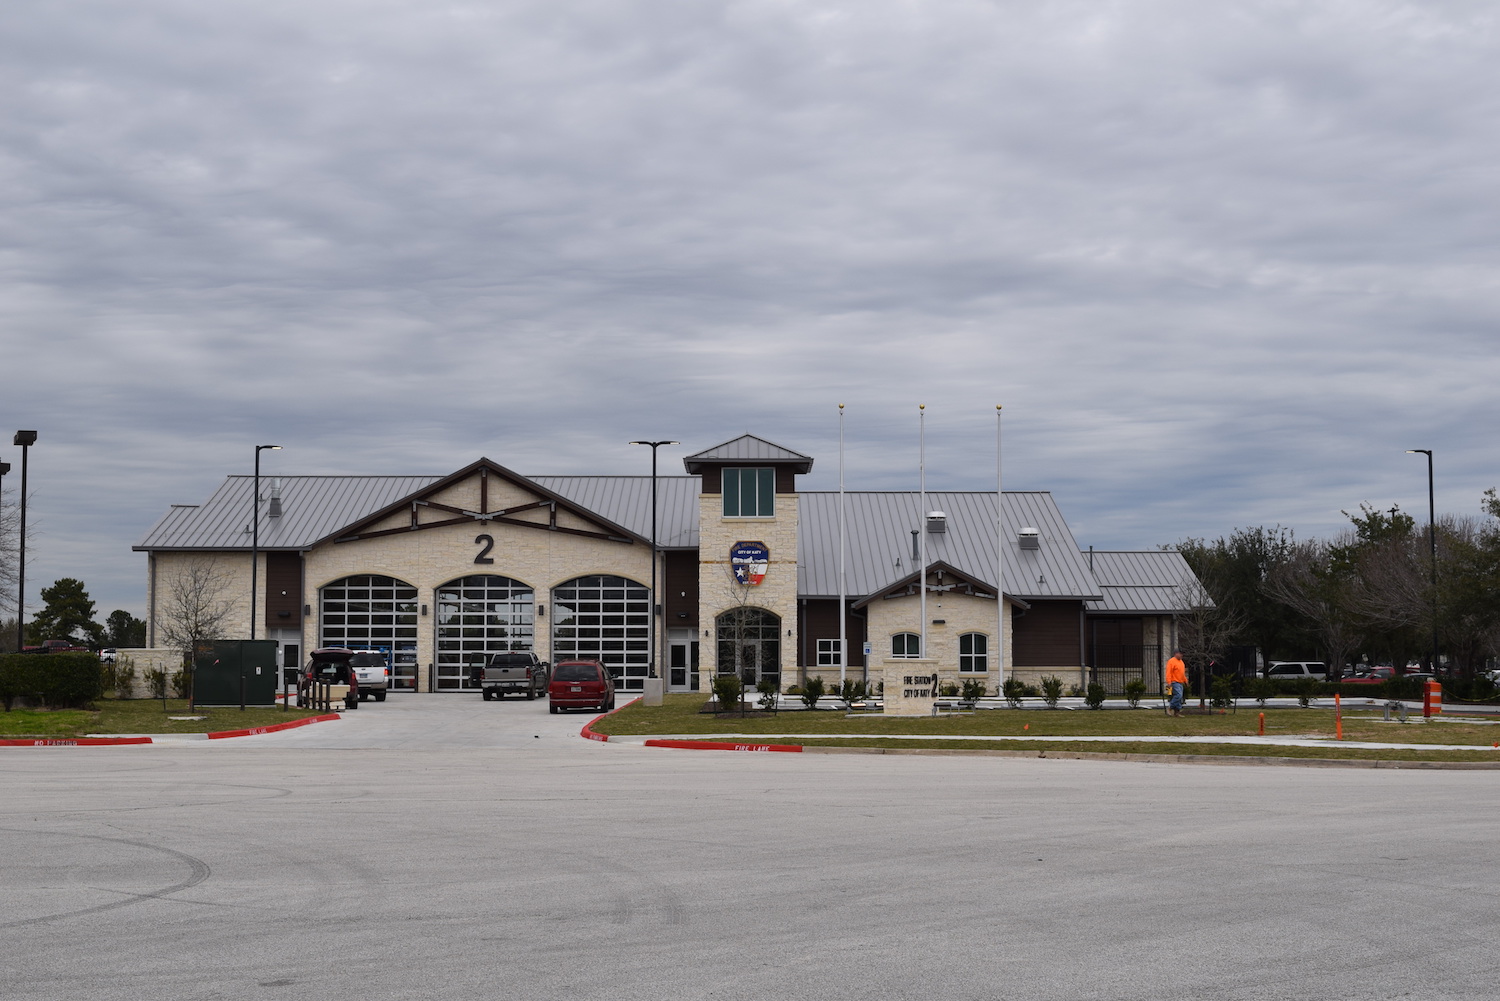 City of Katy hosts grand opening for Fire Station No. 2 just one day before saving drowning child Main Photo